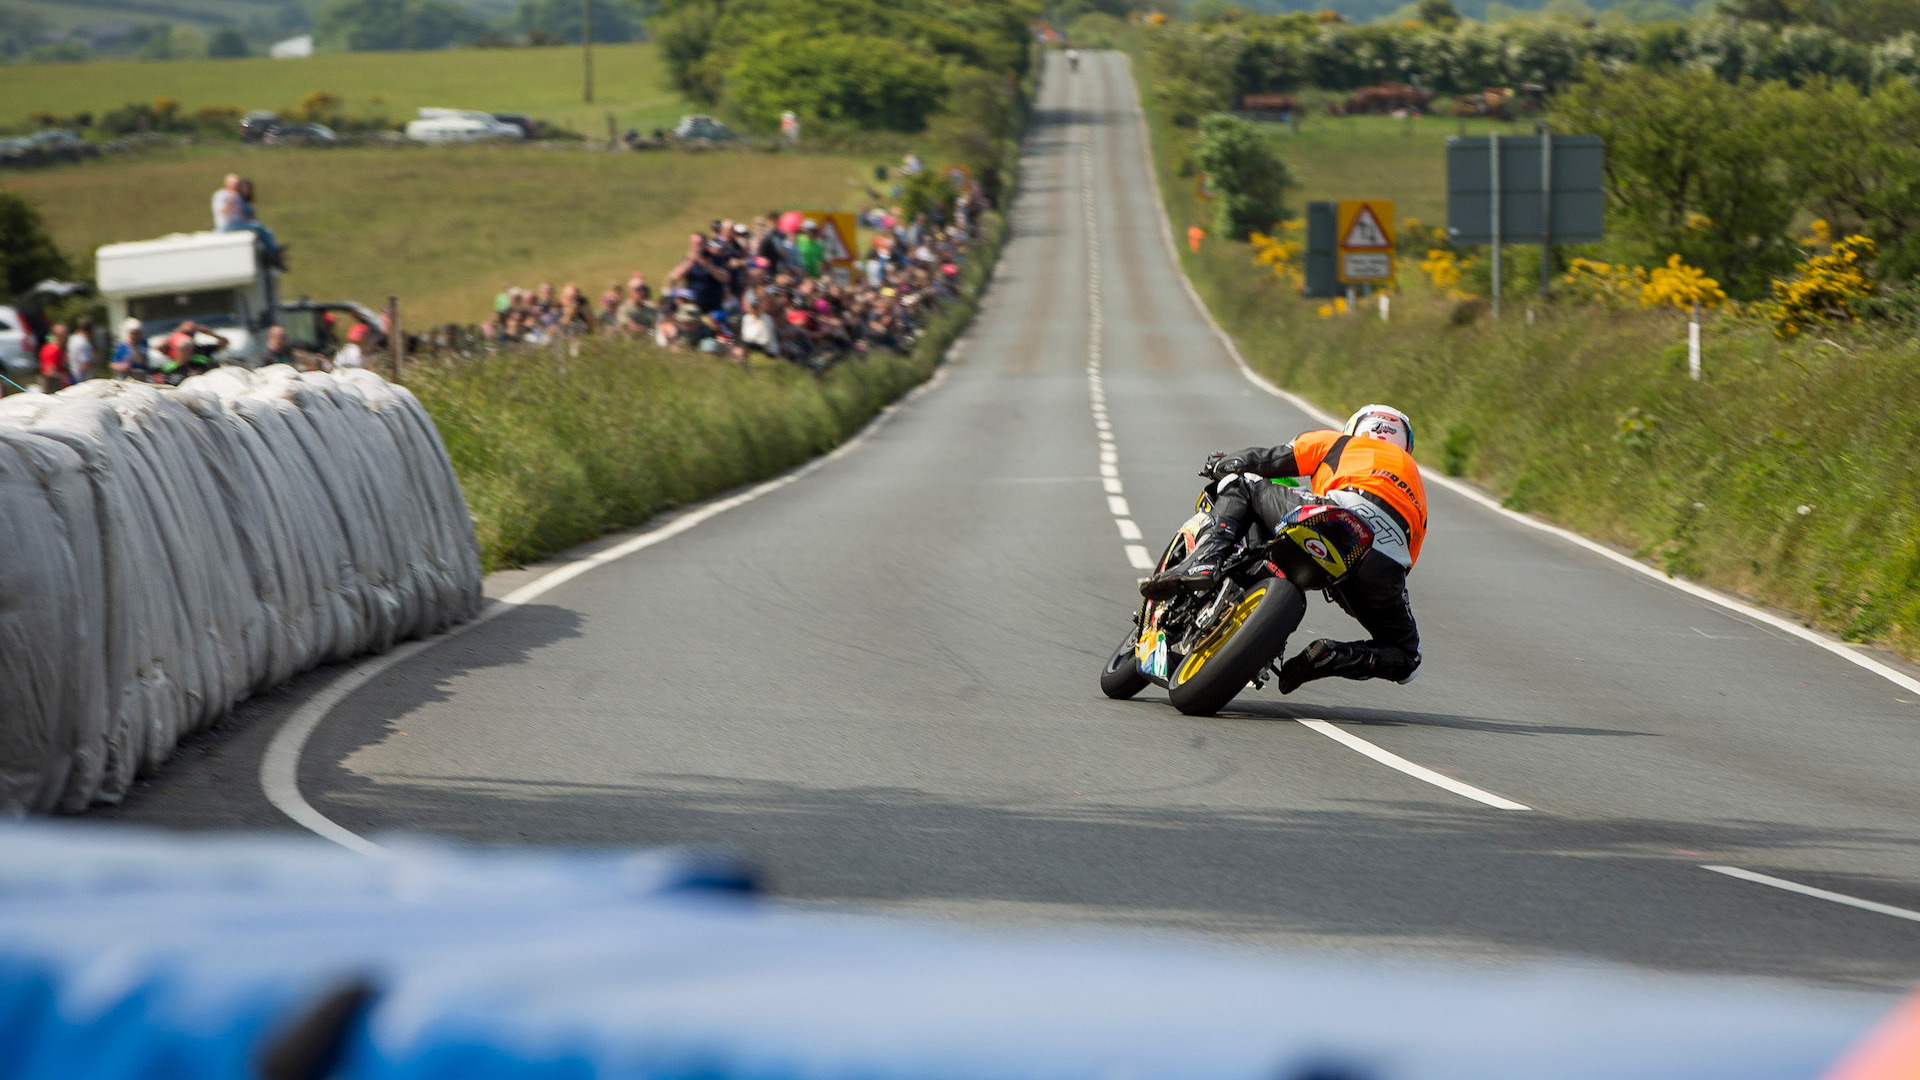 Isle of Man TT 2015 and ride-along with Mark Higgins